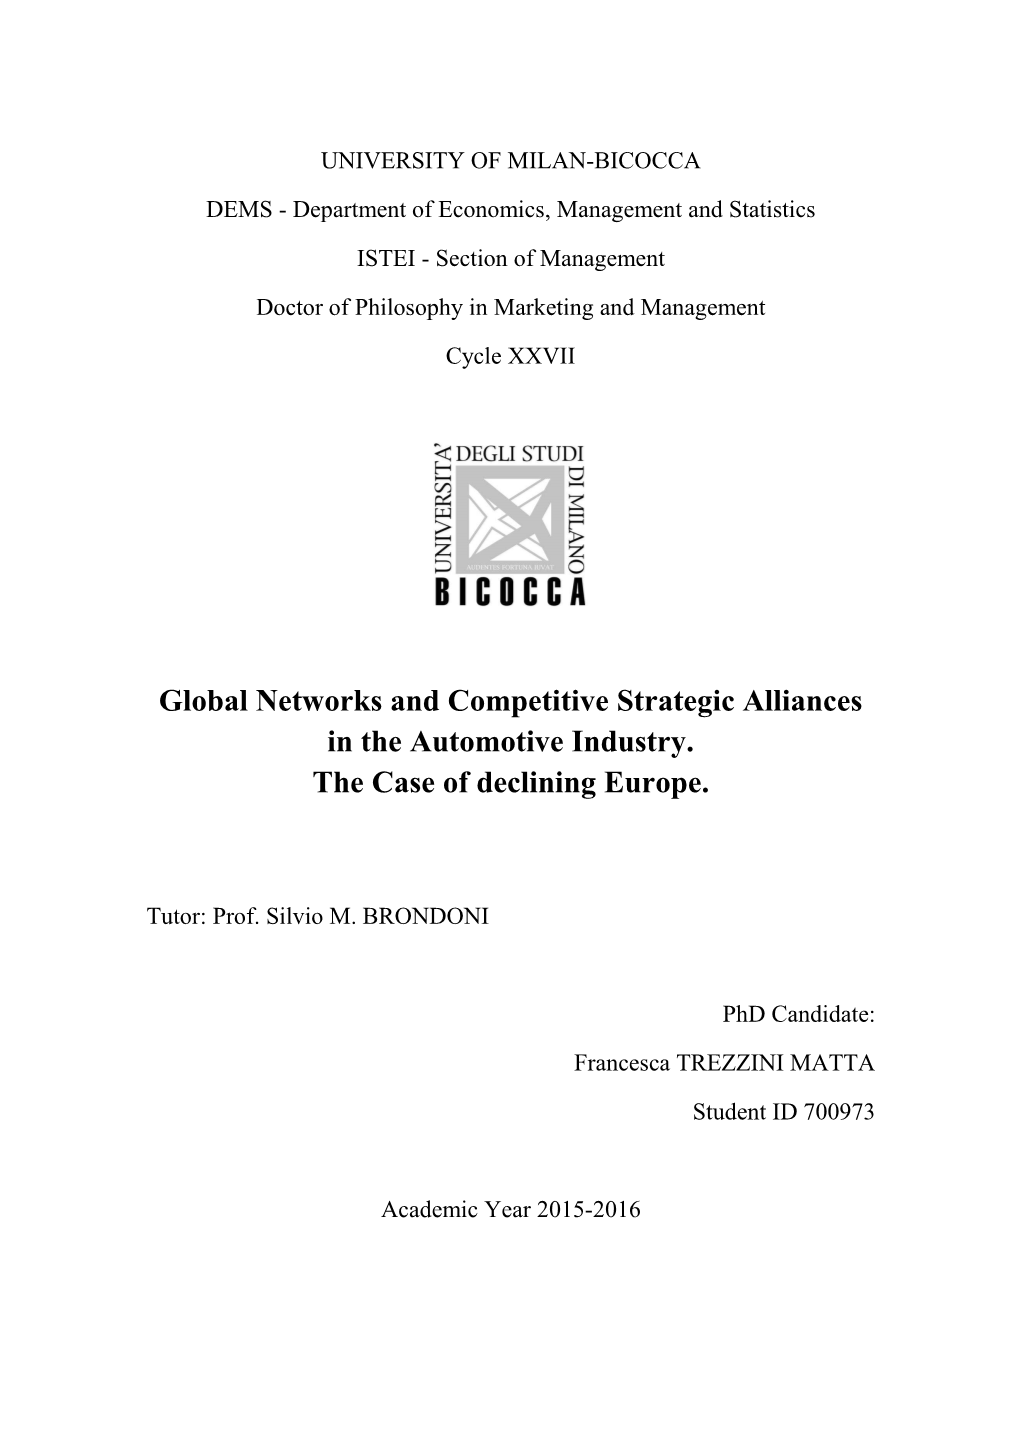 Tesi Di Dottorato Global Networks, Competitive Strategic Alliances in the Automotive Industry. the Case of Declining Europe